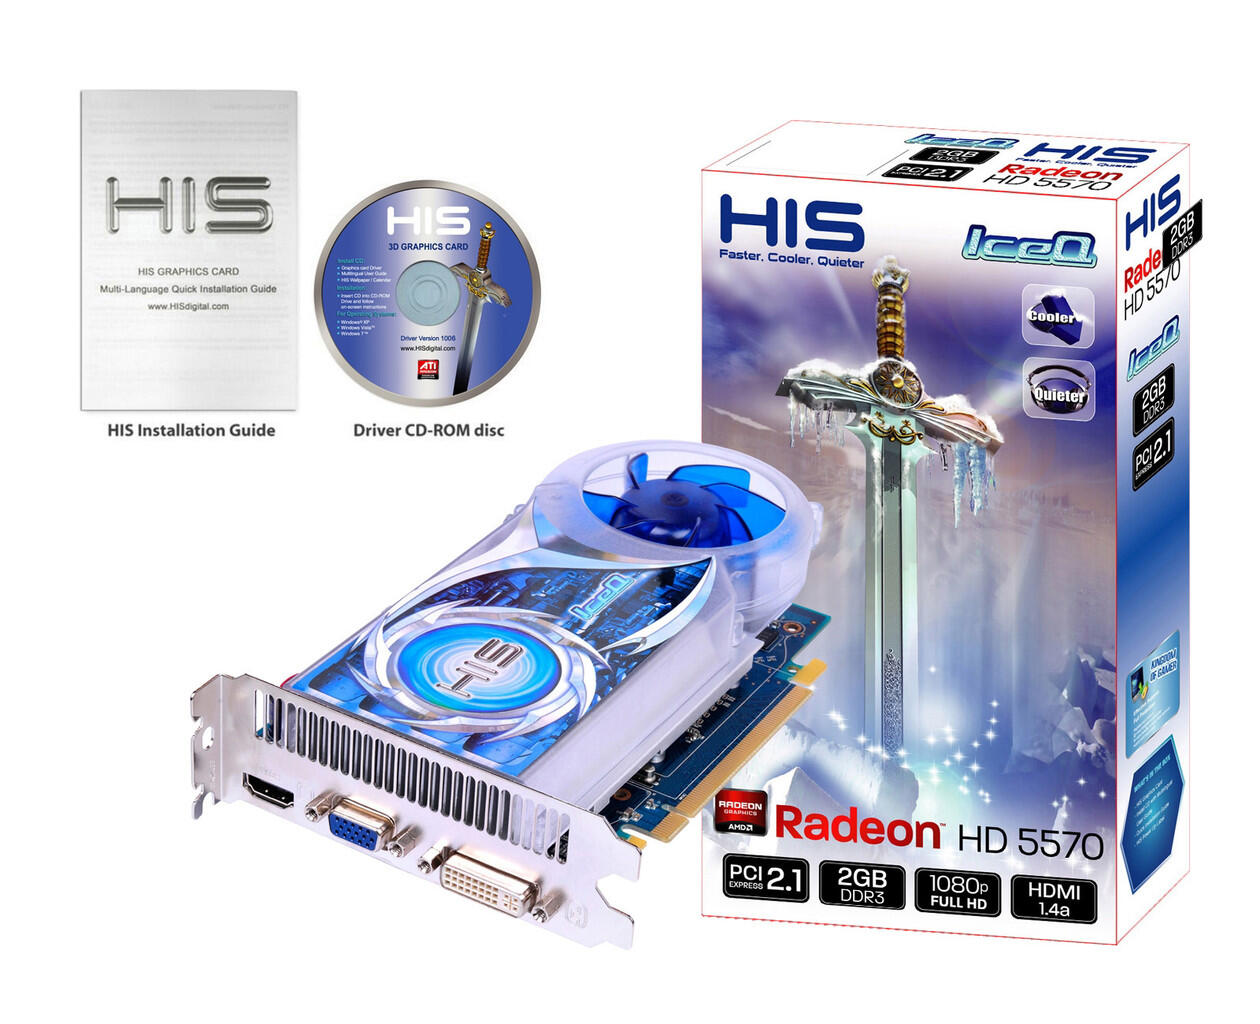 Review HIS 5570 ICEQ 2GB DDR3